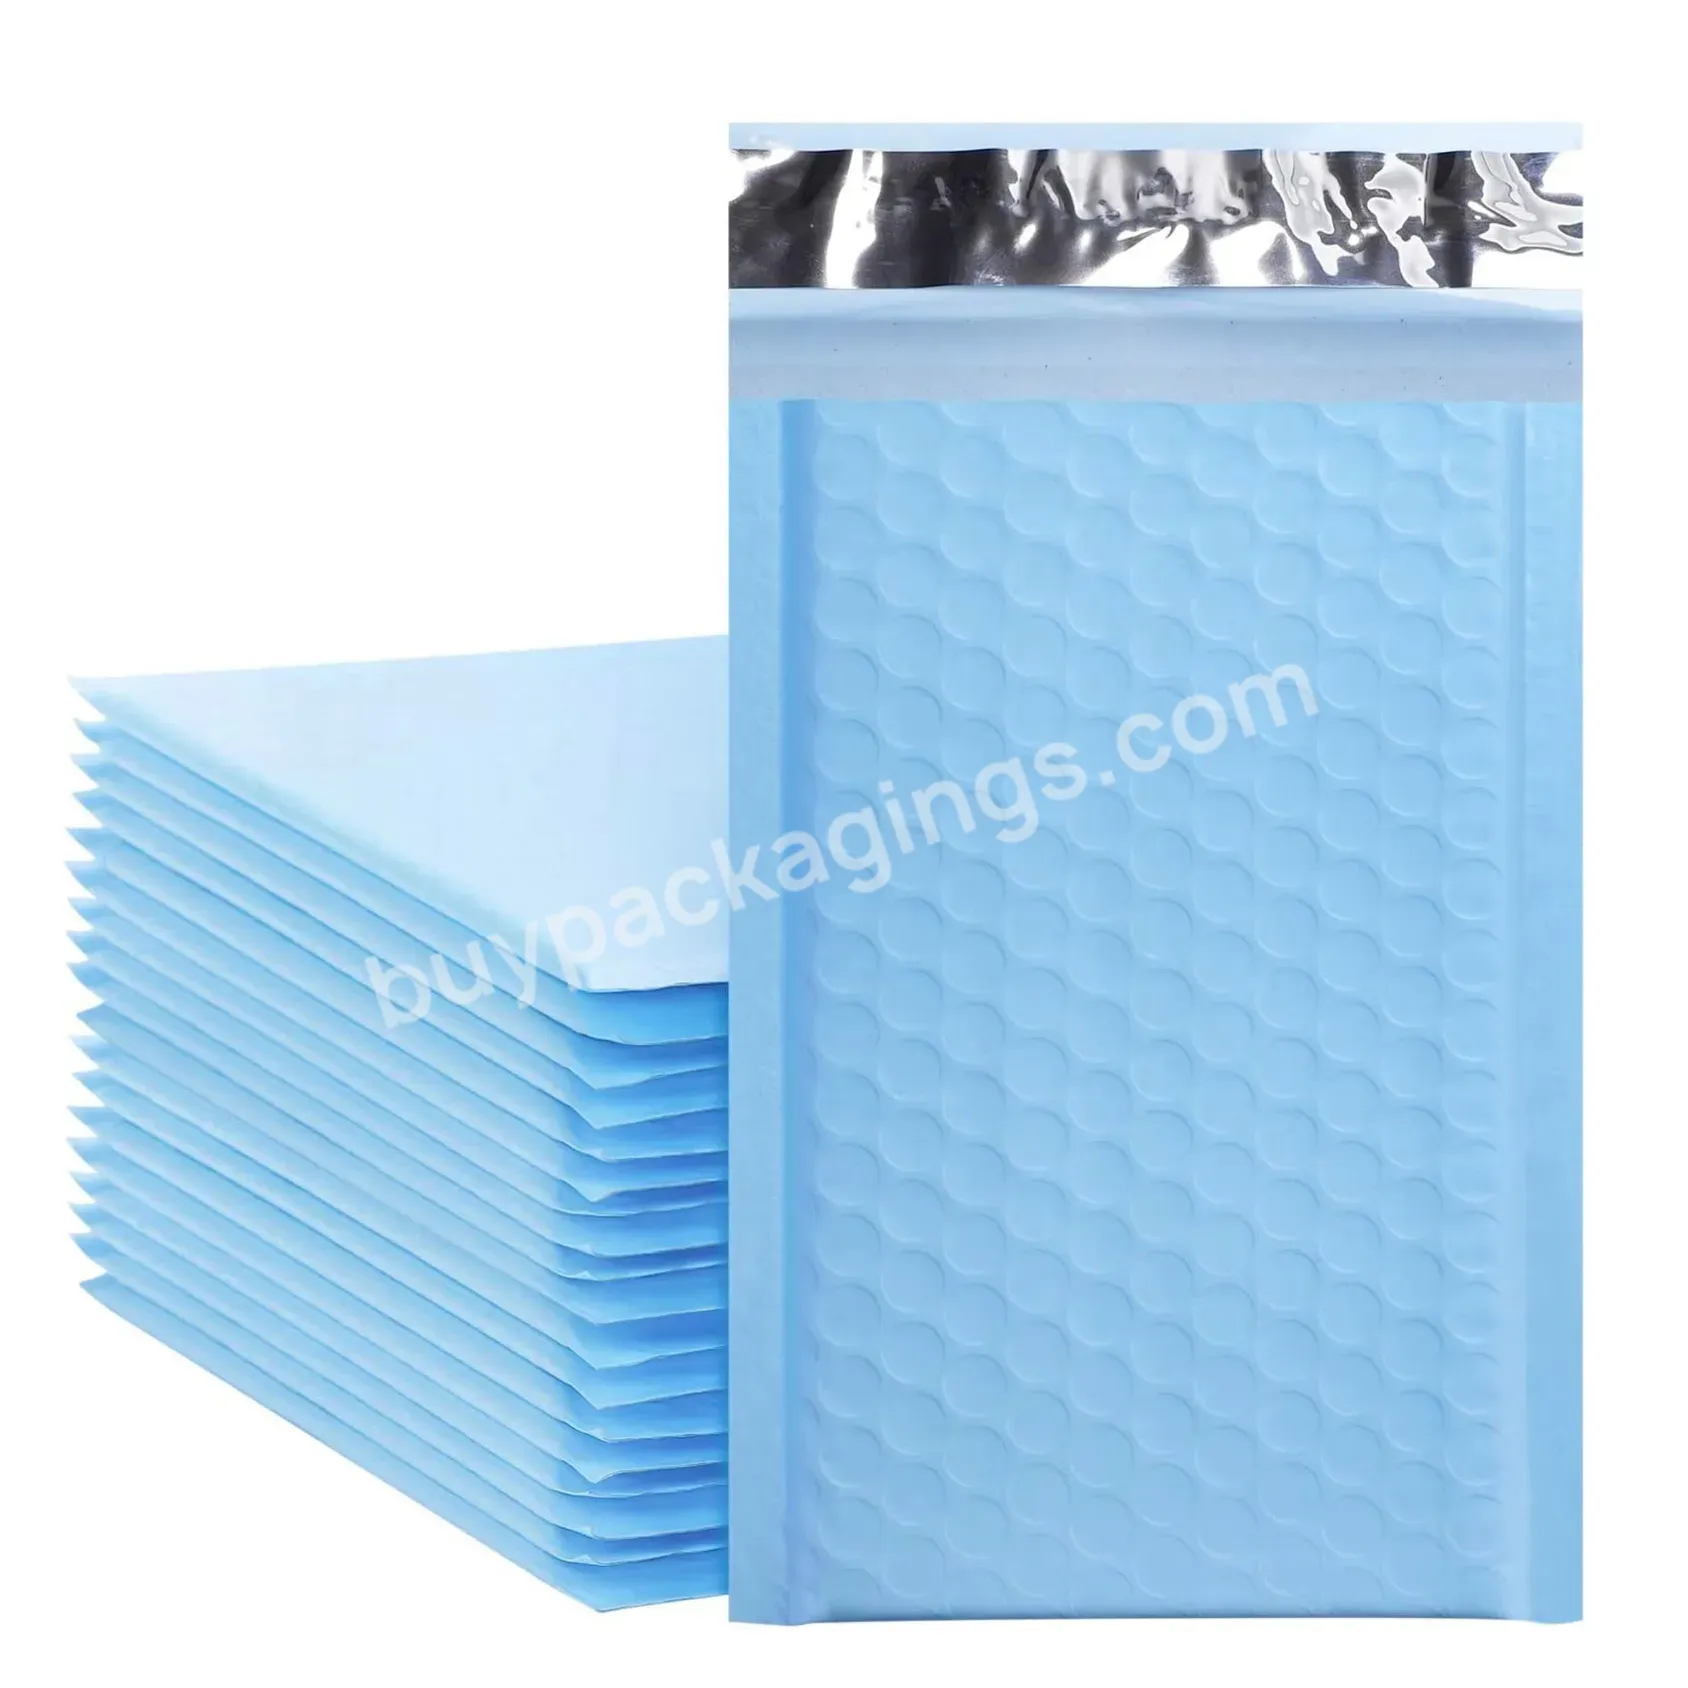 Tamper Proof Ecommerce Packaging Blue Poly Bubble Mailer Compostable Padded Packaging Wrap Envelopes For Fragile Items - Buy Mailer Bubble Compostable,Mailer Bubble Recycled,Fancy Bubble Mailers.